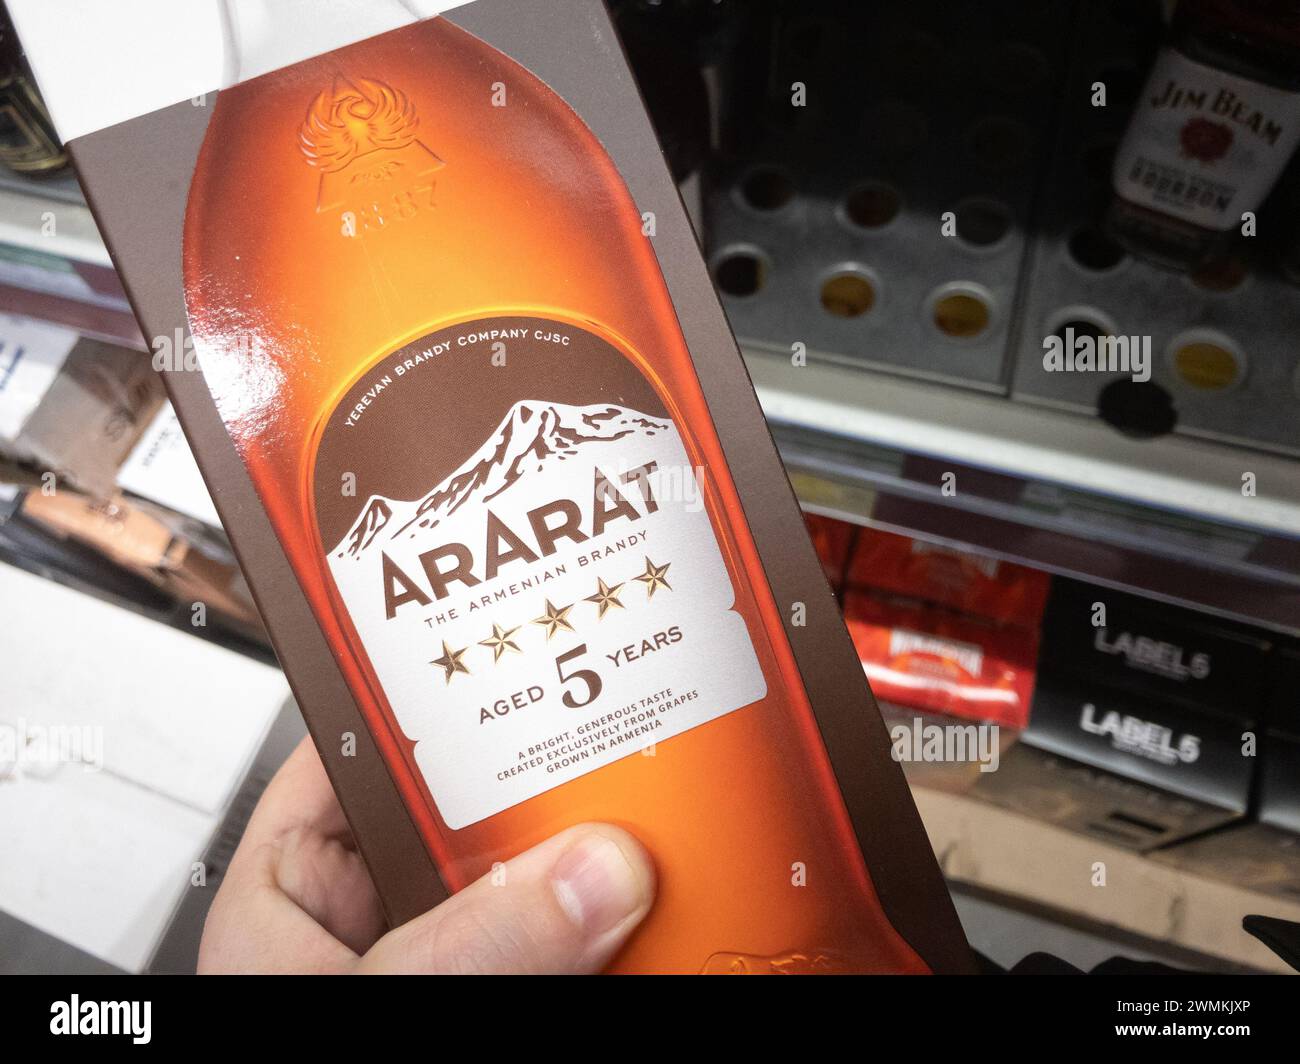 Picture of a bottle of Ararat Cognac for sale in Belgrade, Serbia. Ararat is a brand of Armenian brandy produced 10 years before the Yerevan Brandy Co Stock Photo